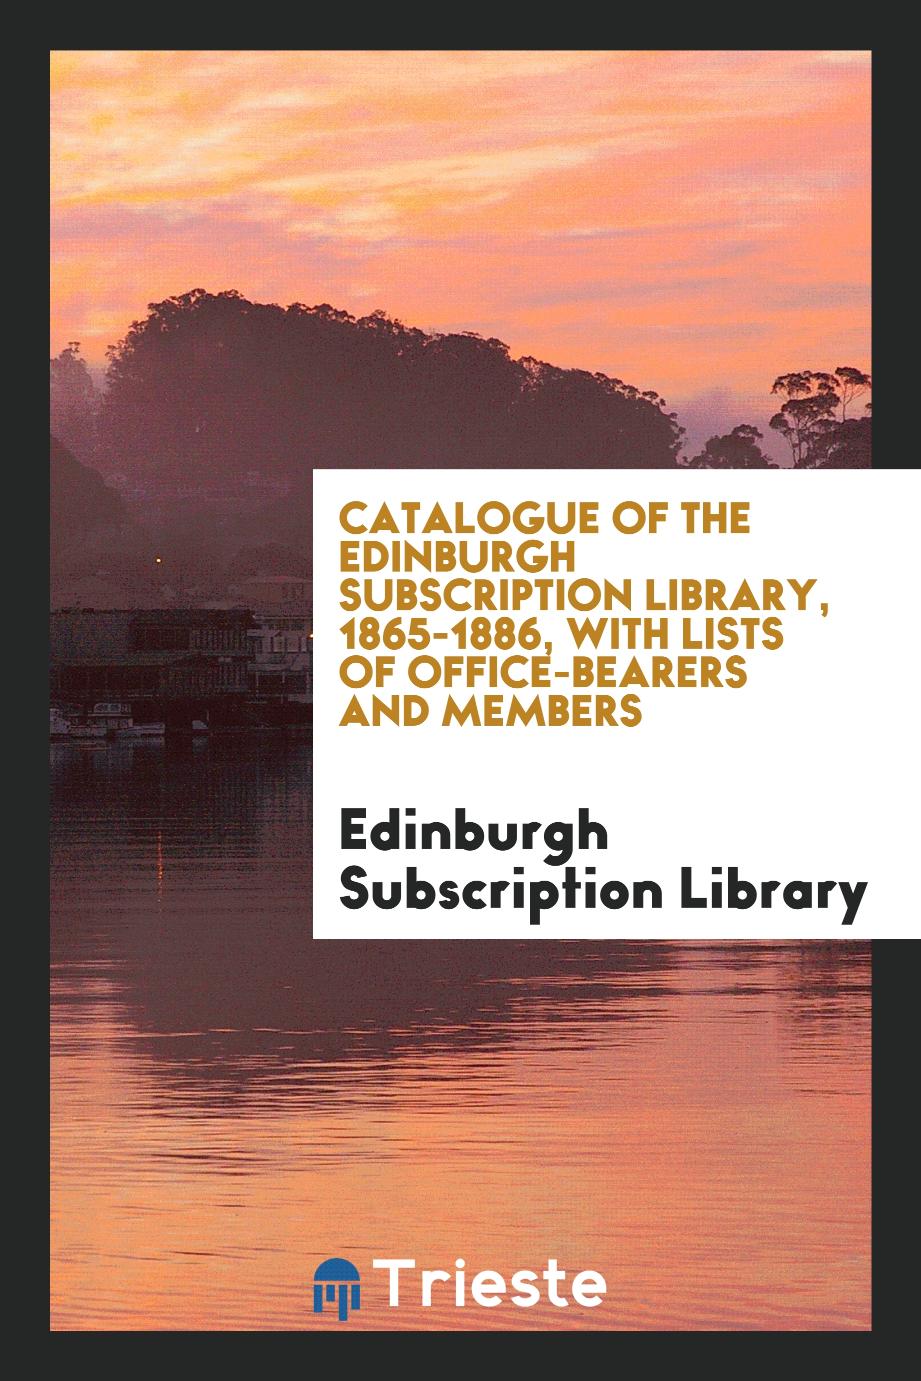 Catalogue of The Edinburgh Subscription Library, 1865-1886, with lists of office-bearers and members